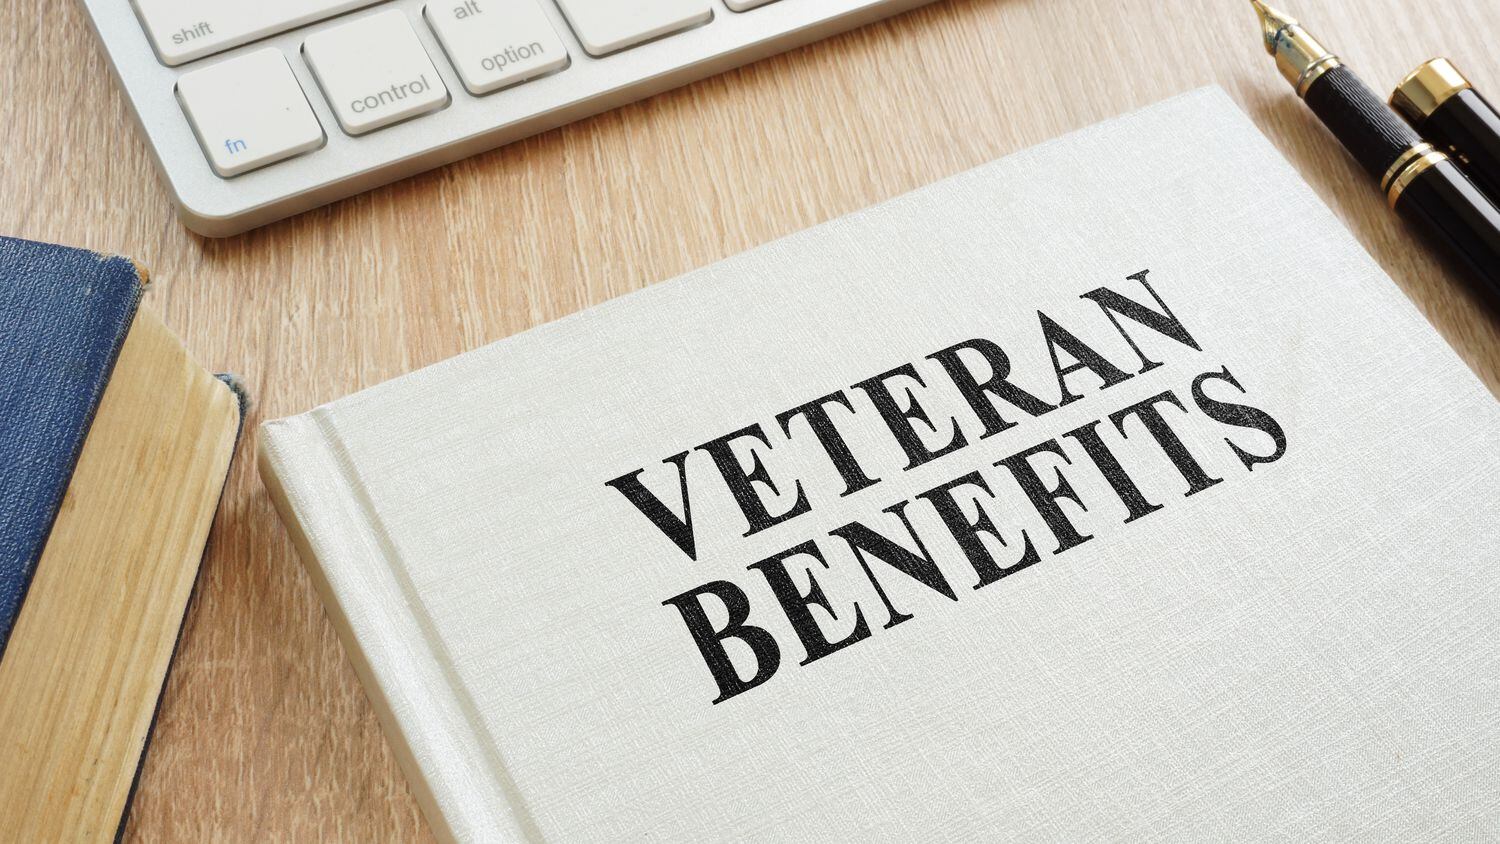 Information about these, and other veterans programs, is available at va.gov.